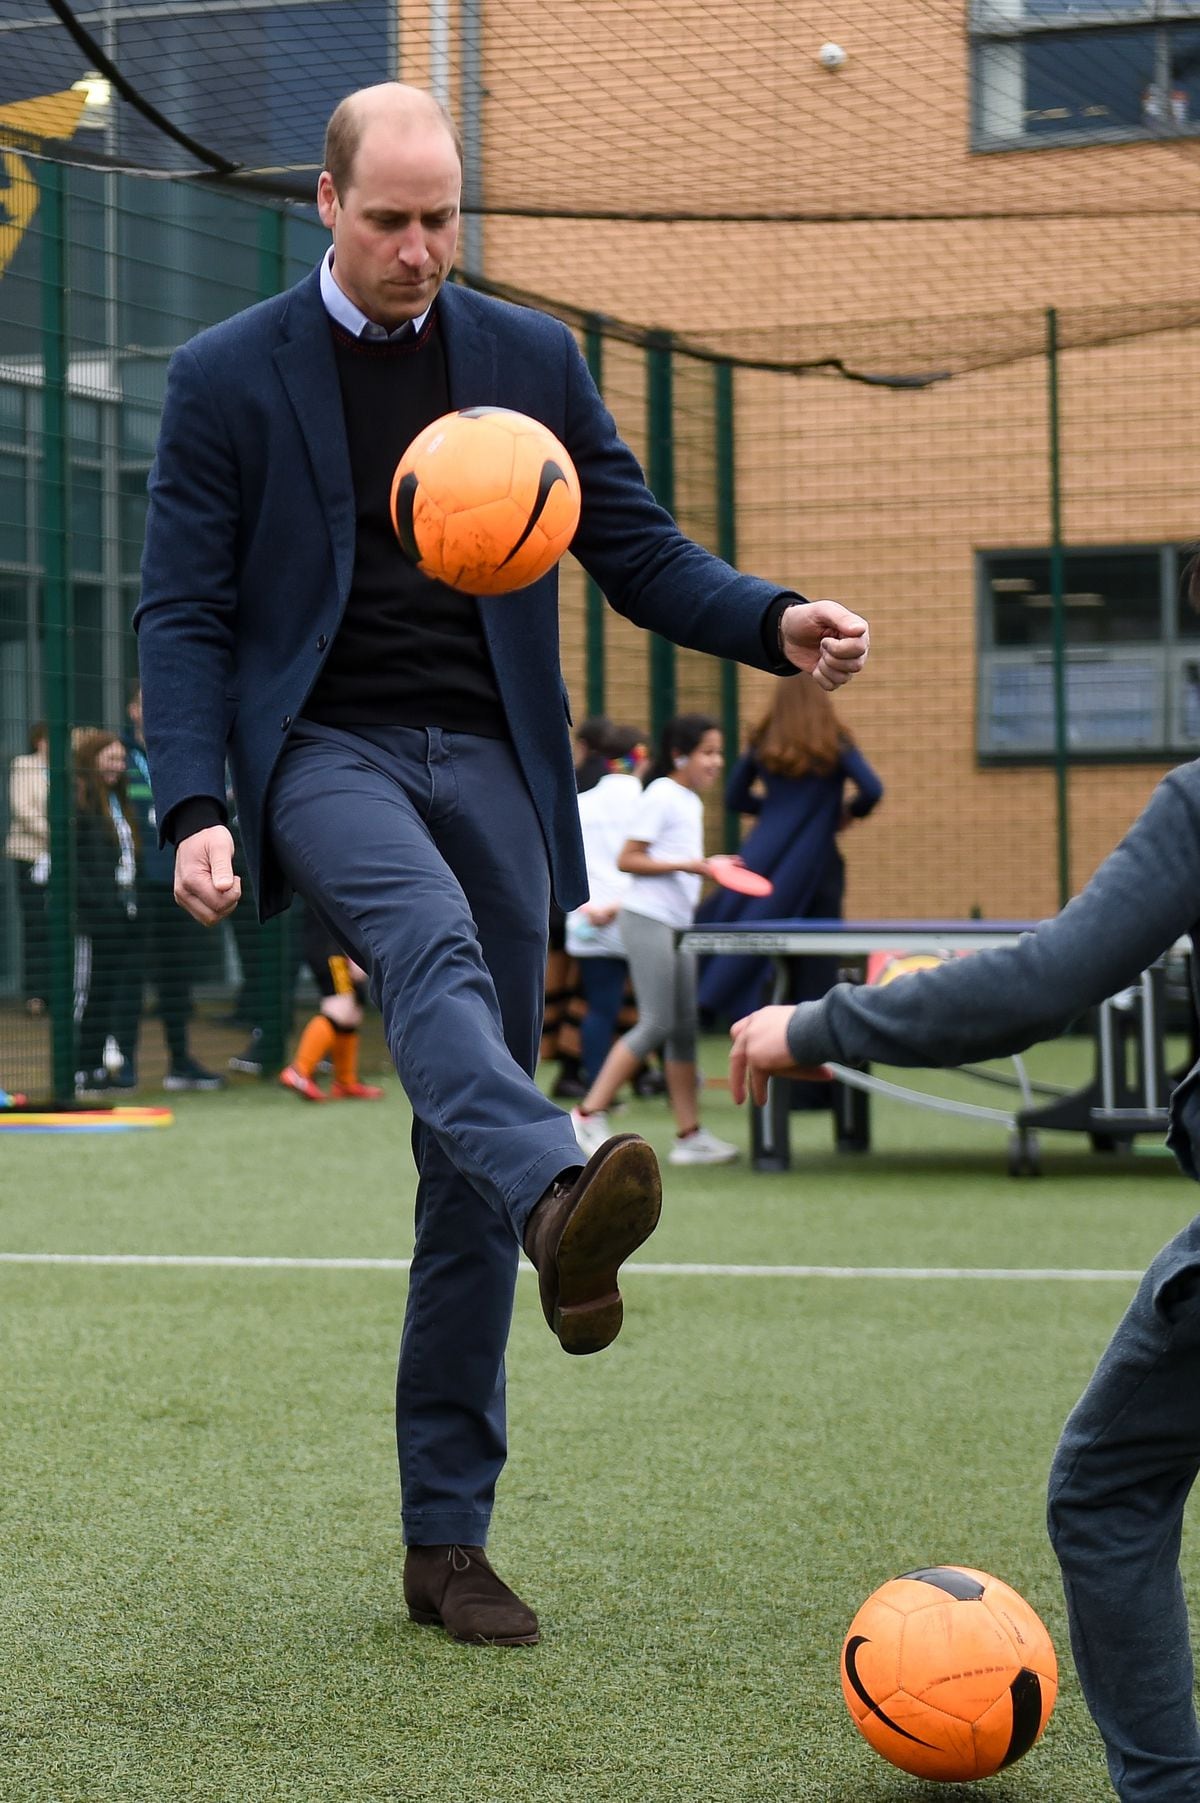 Keepy uppy from Prince William